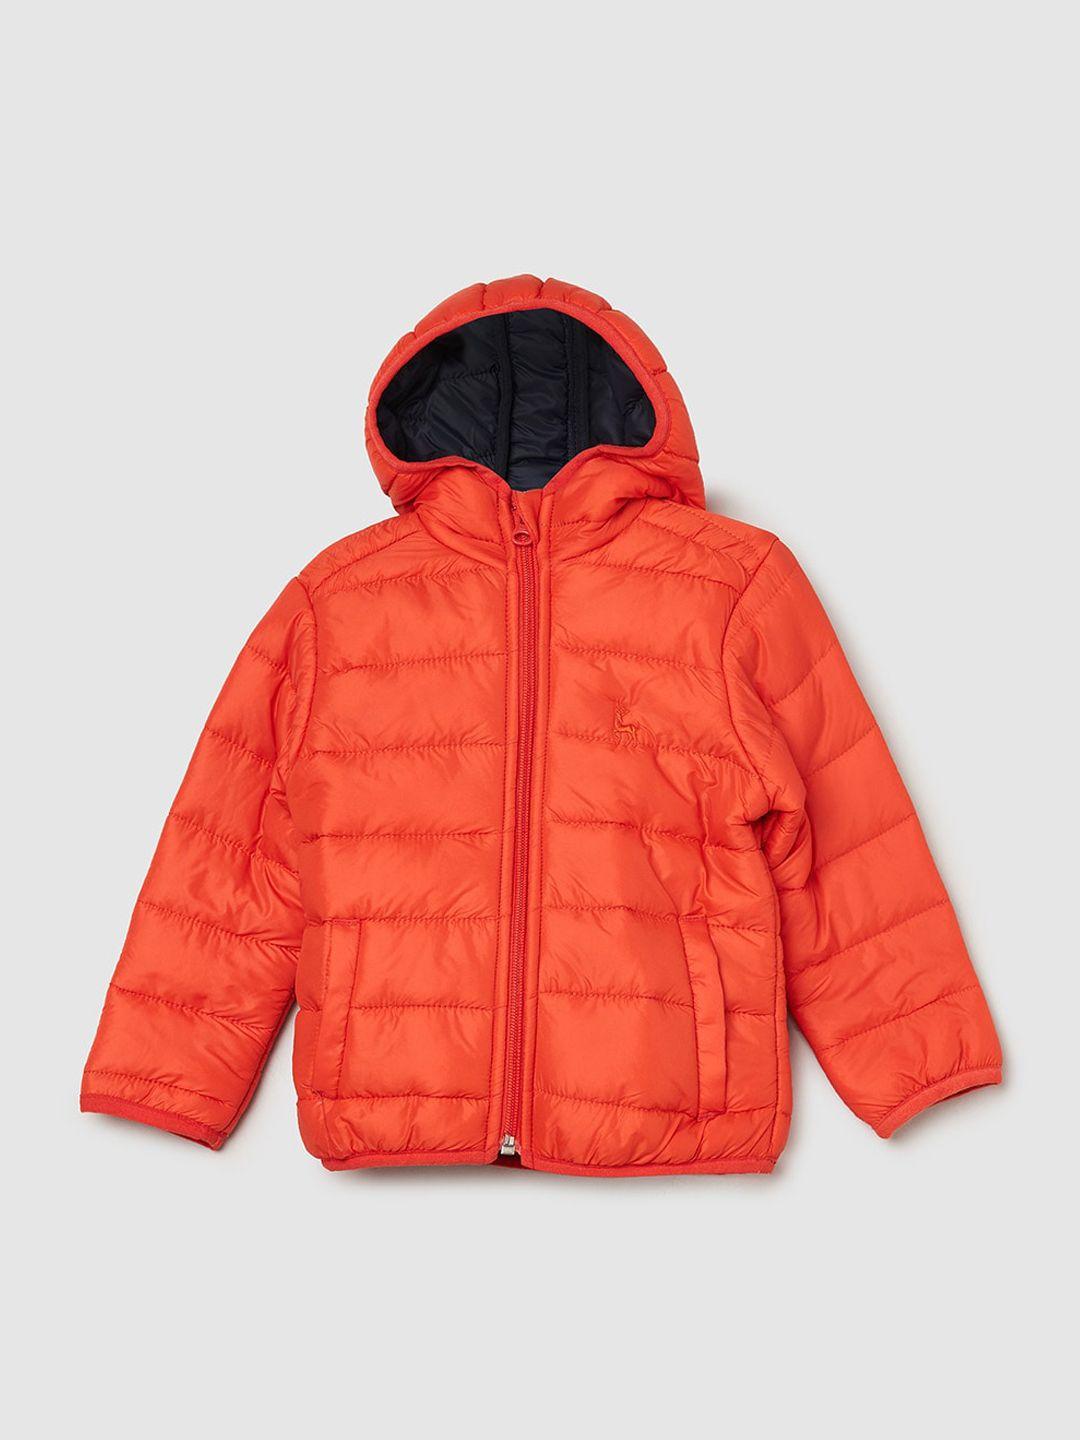 max-boys-hooded-puffer-jacket